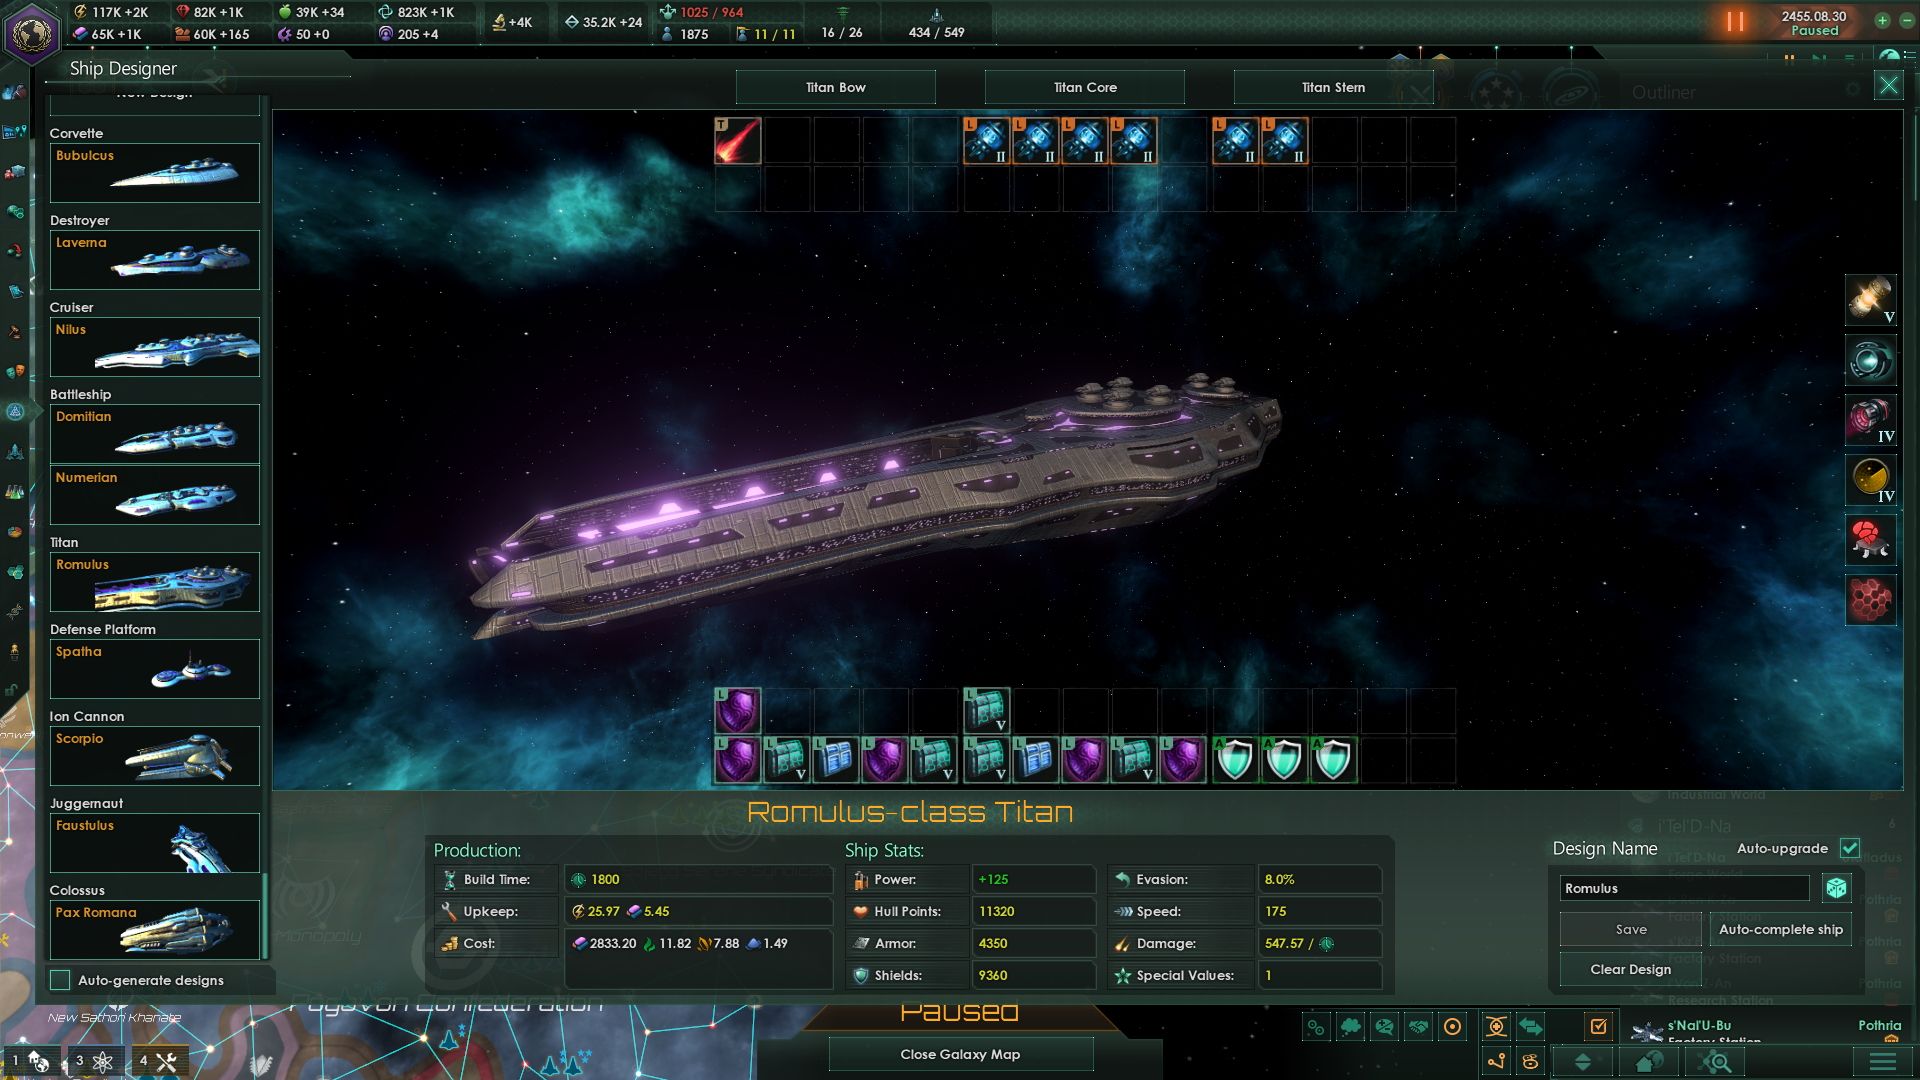 A Stellaris screenshot showing the ship designer UI. A large ship is surrounded by UI elements.